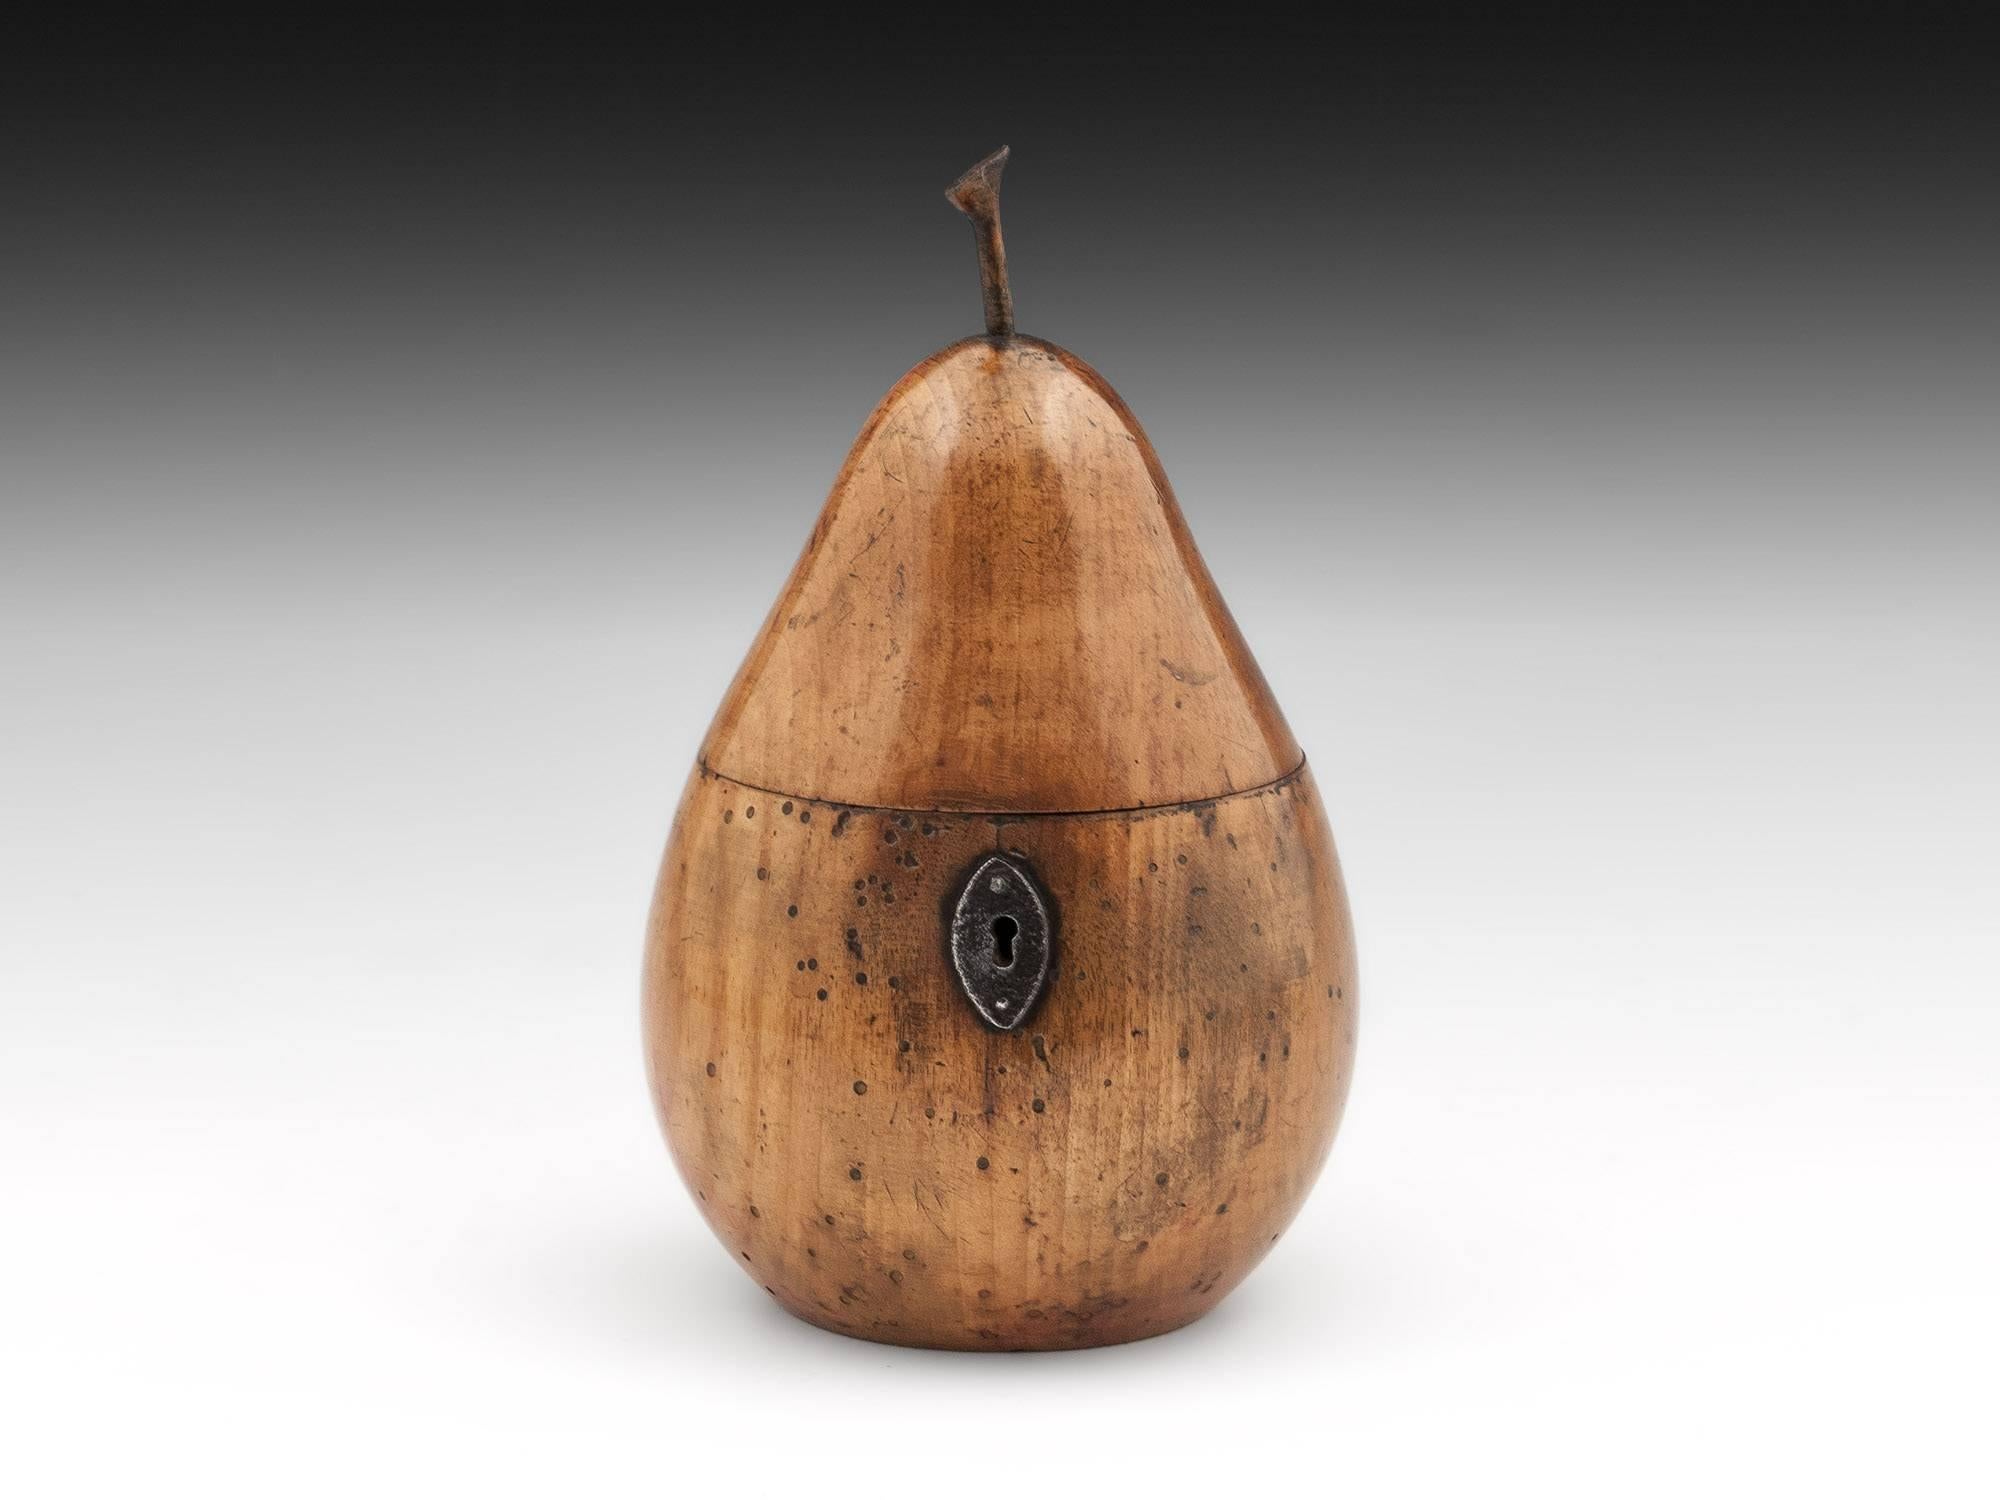 Antique Treen Pear fruit tea caddy with wonderful patination, shaped stalk and oval cut steel escutcheon. The pear has had some worm over the years which has been treated, despite this it has a wonderful color with some red blushes to its body and